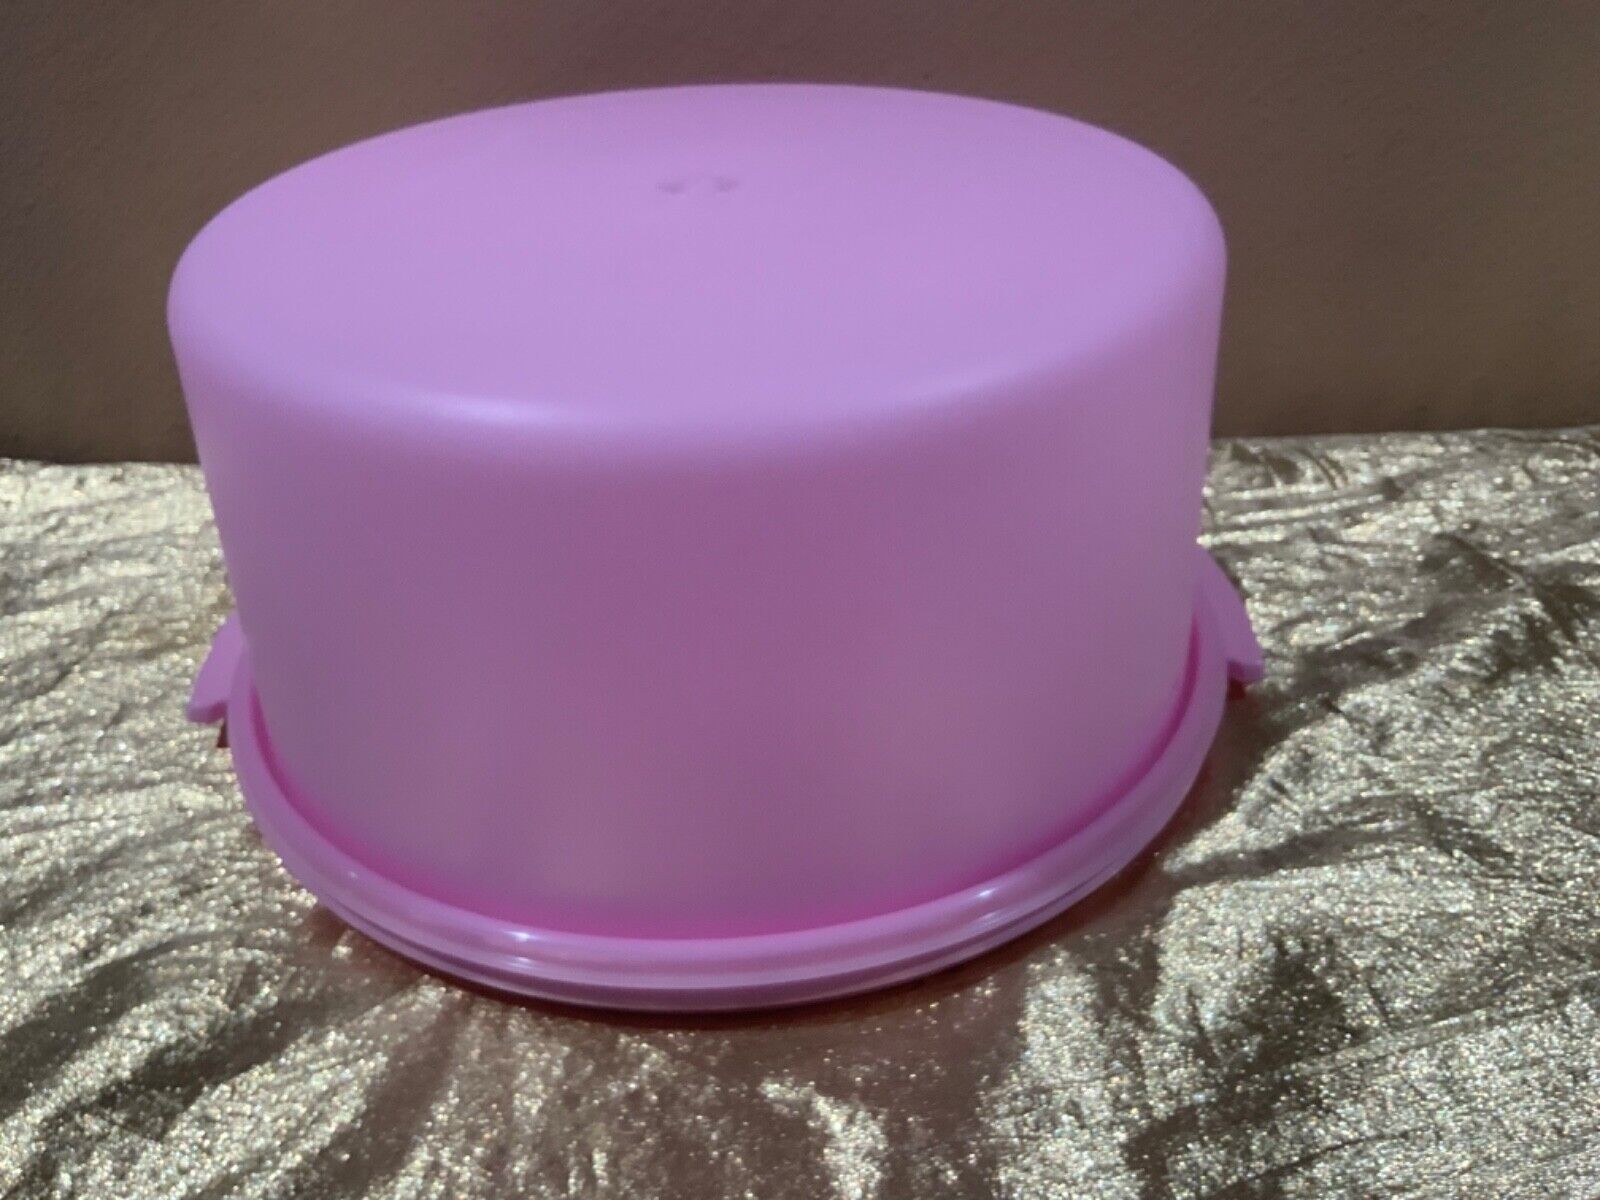 New Tupperware Beauty UNIQUE And HUGE Round Cake Pie Keeper with PINK Color